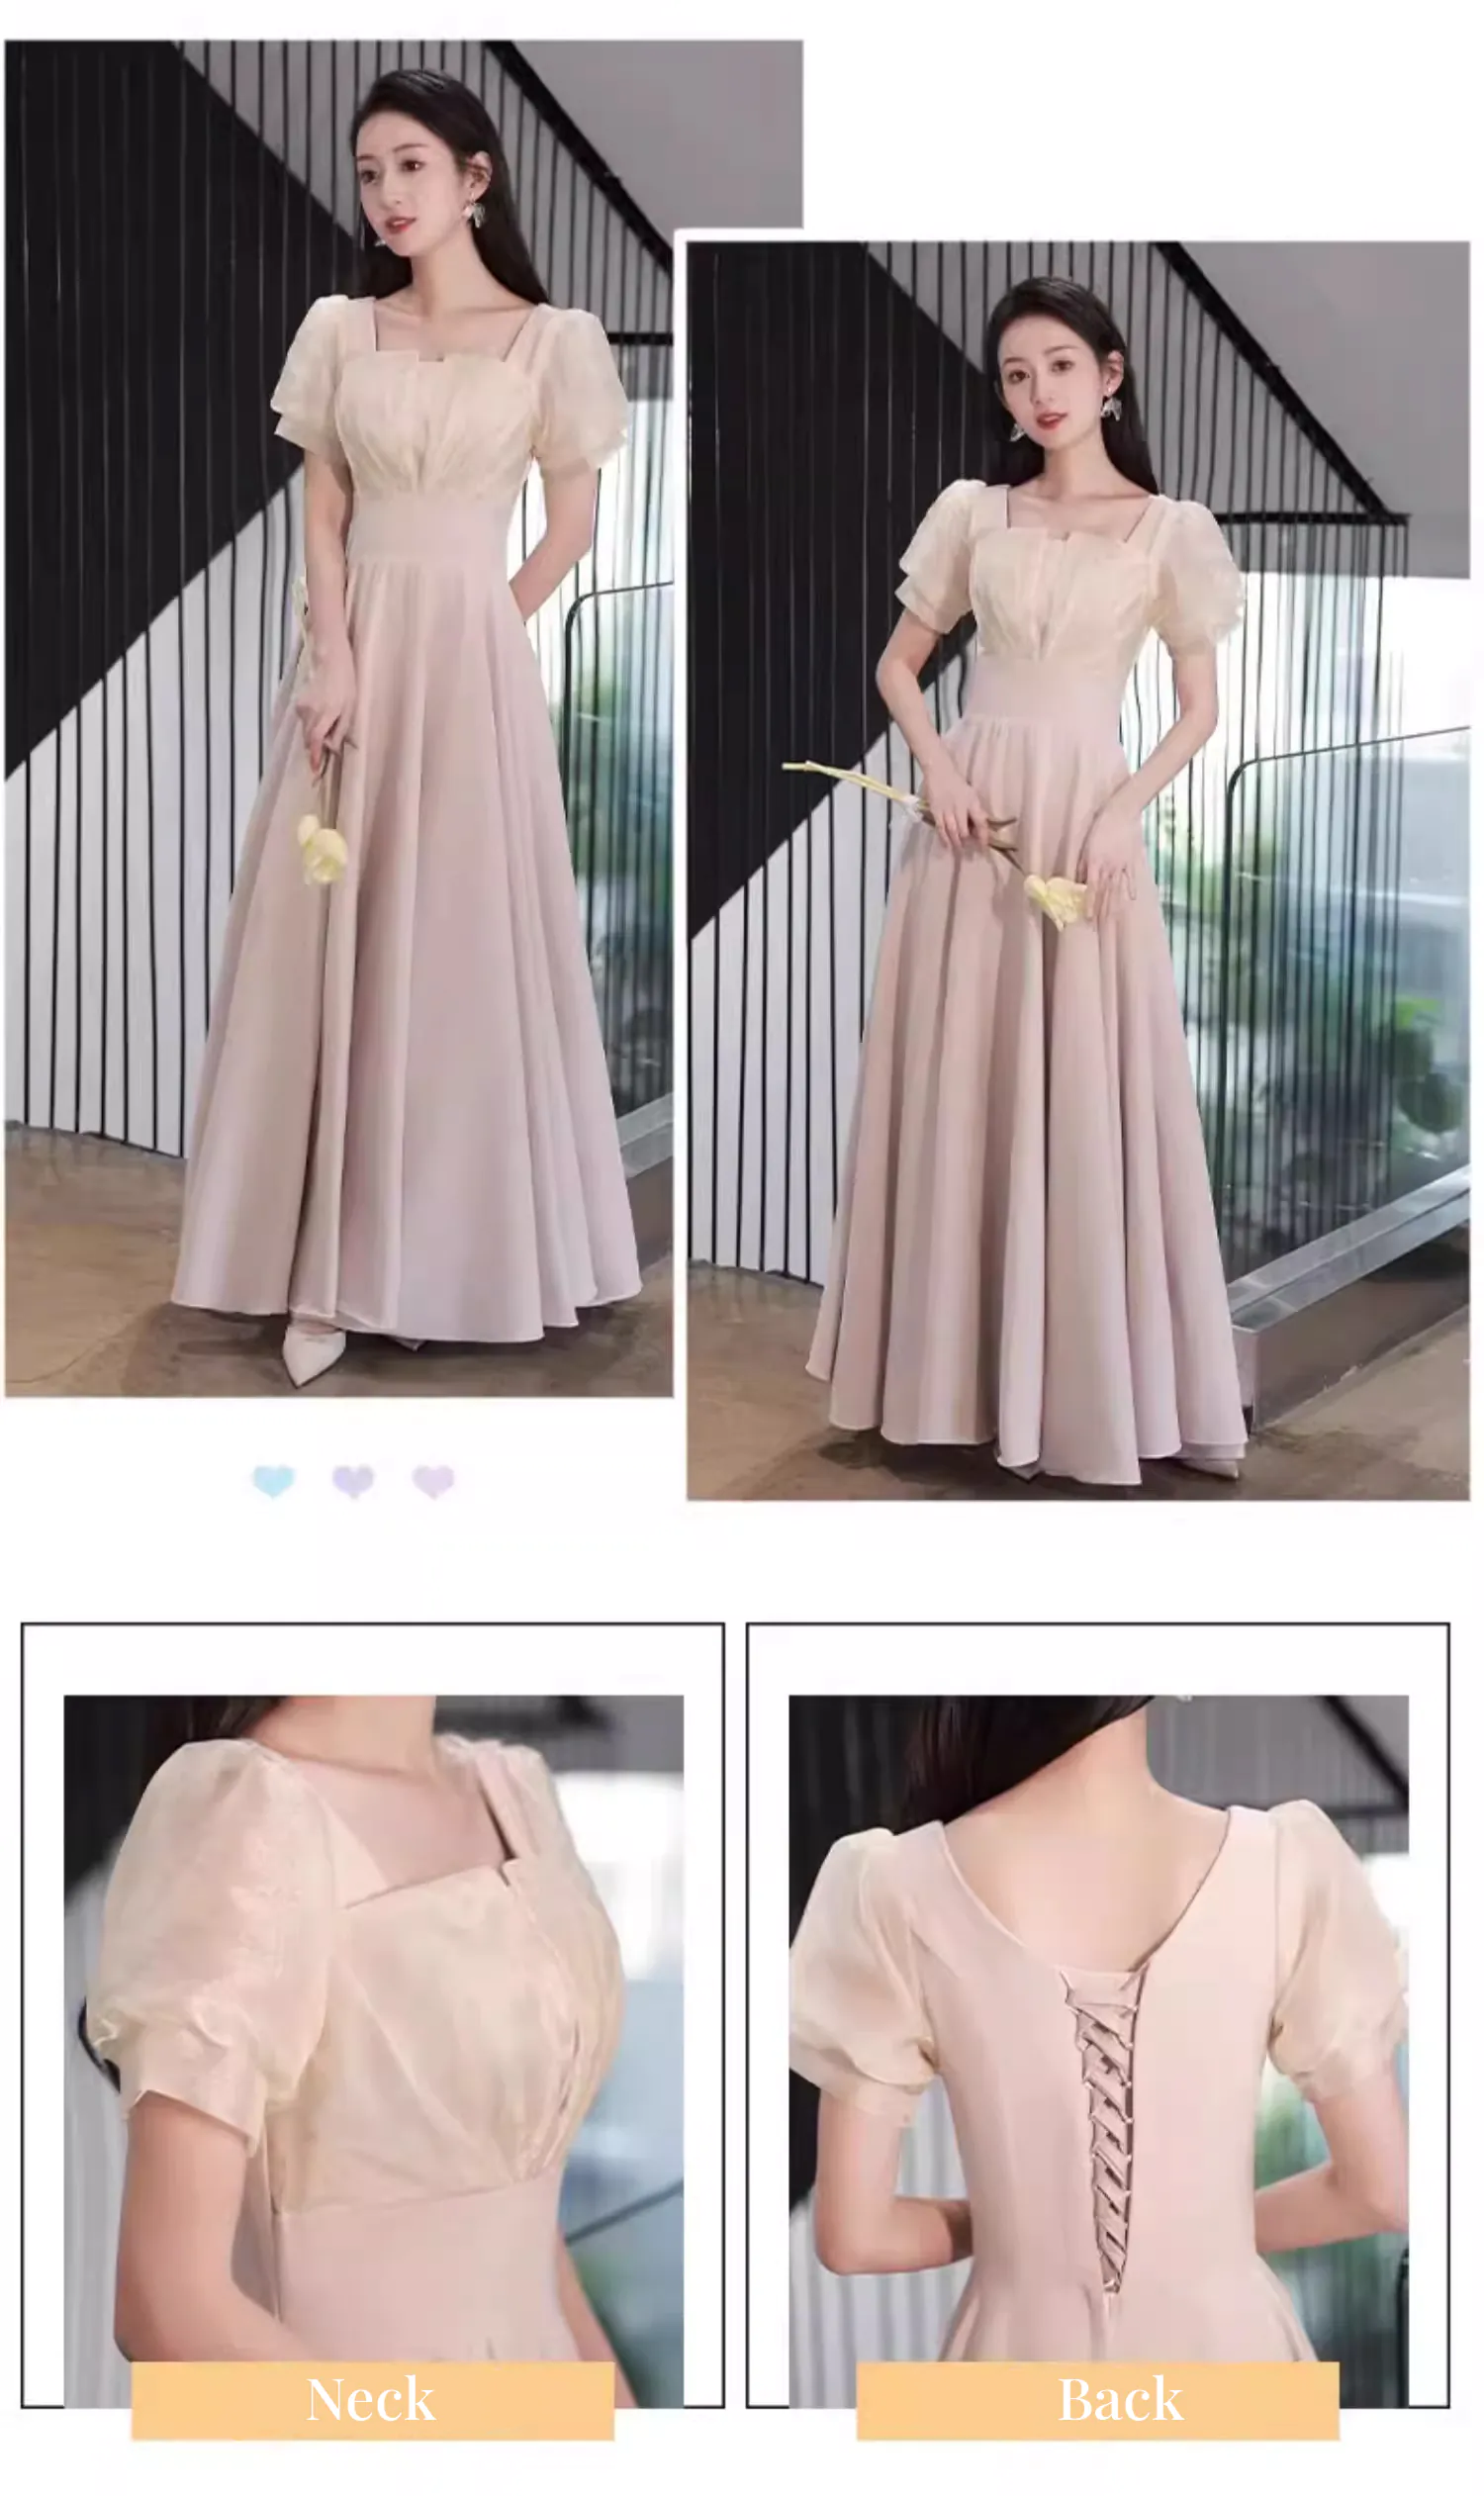 Simple-Pink-Short-Sleeve-Bridesmaid-Dress-Homecoming-Graduation-Gown16